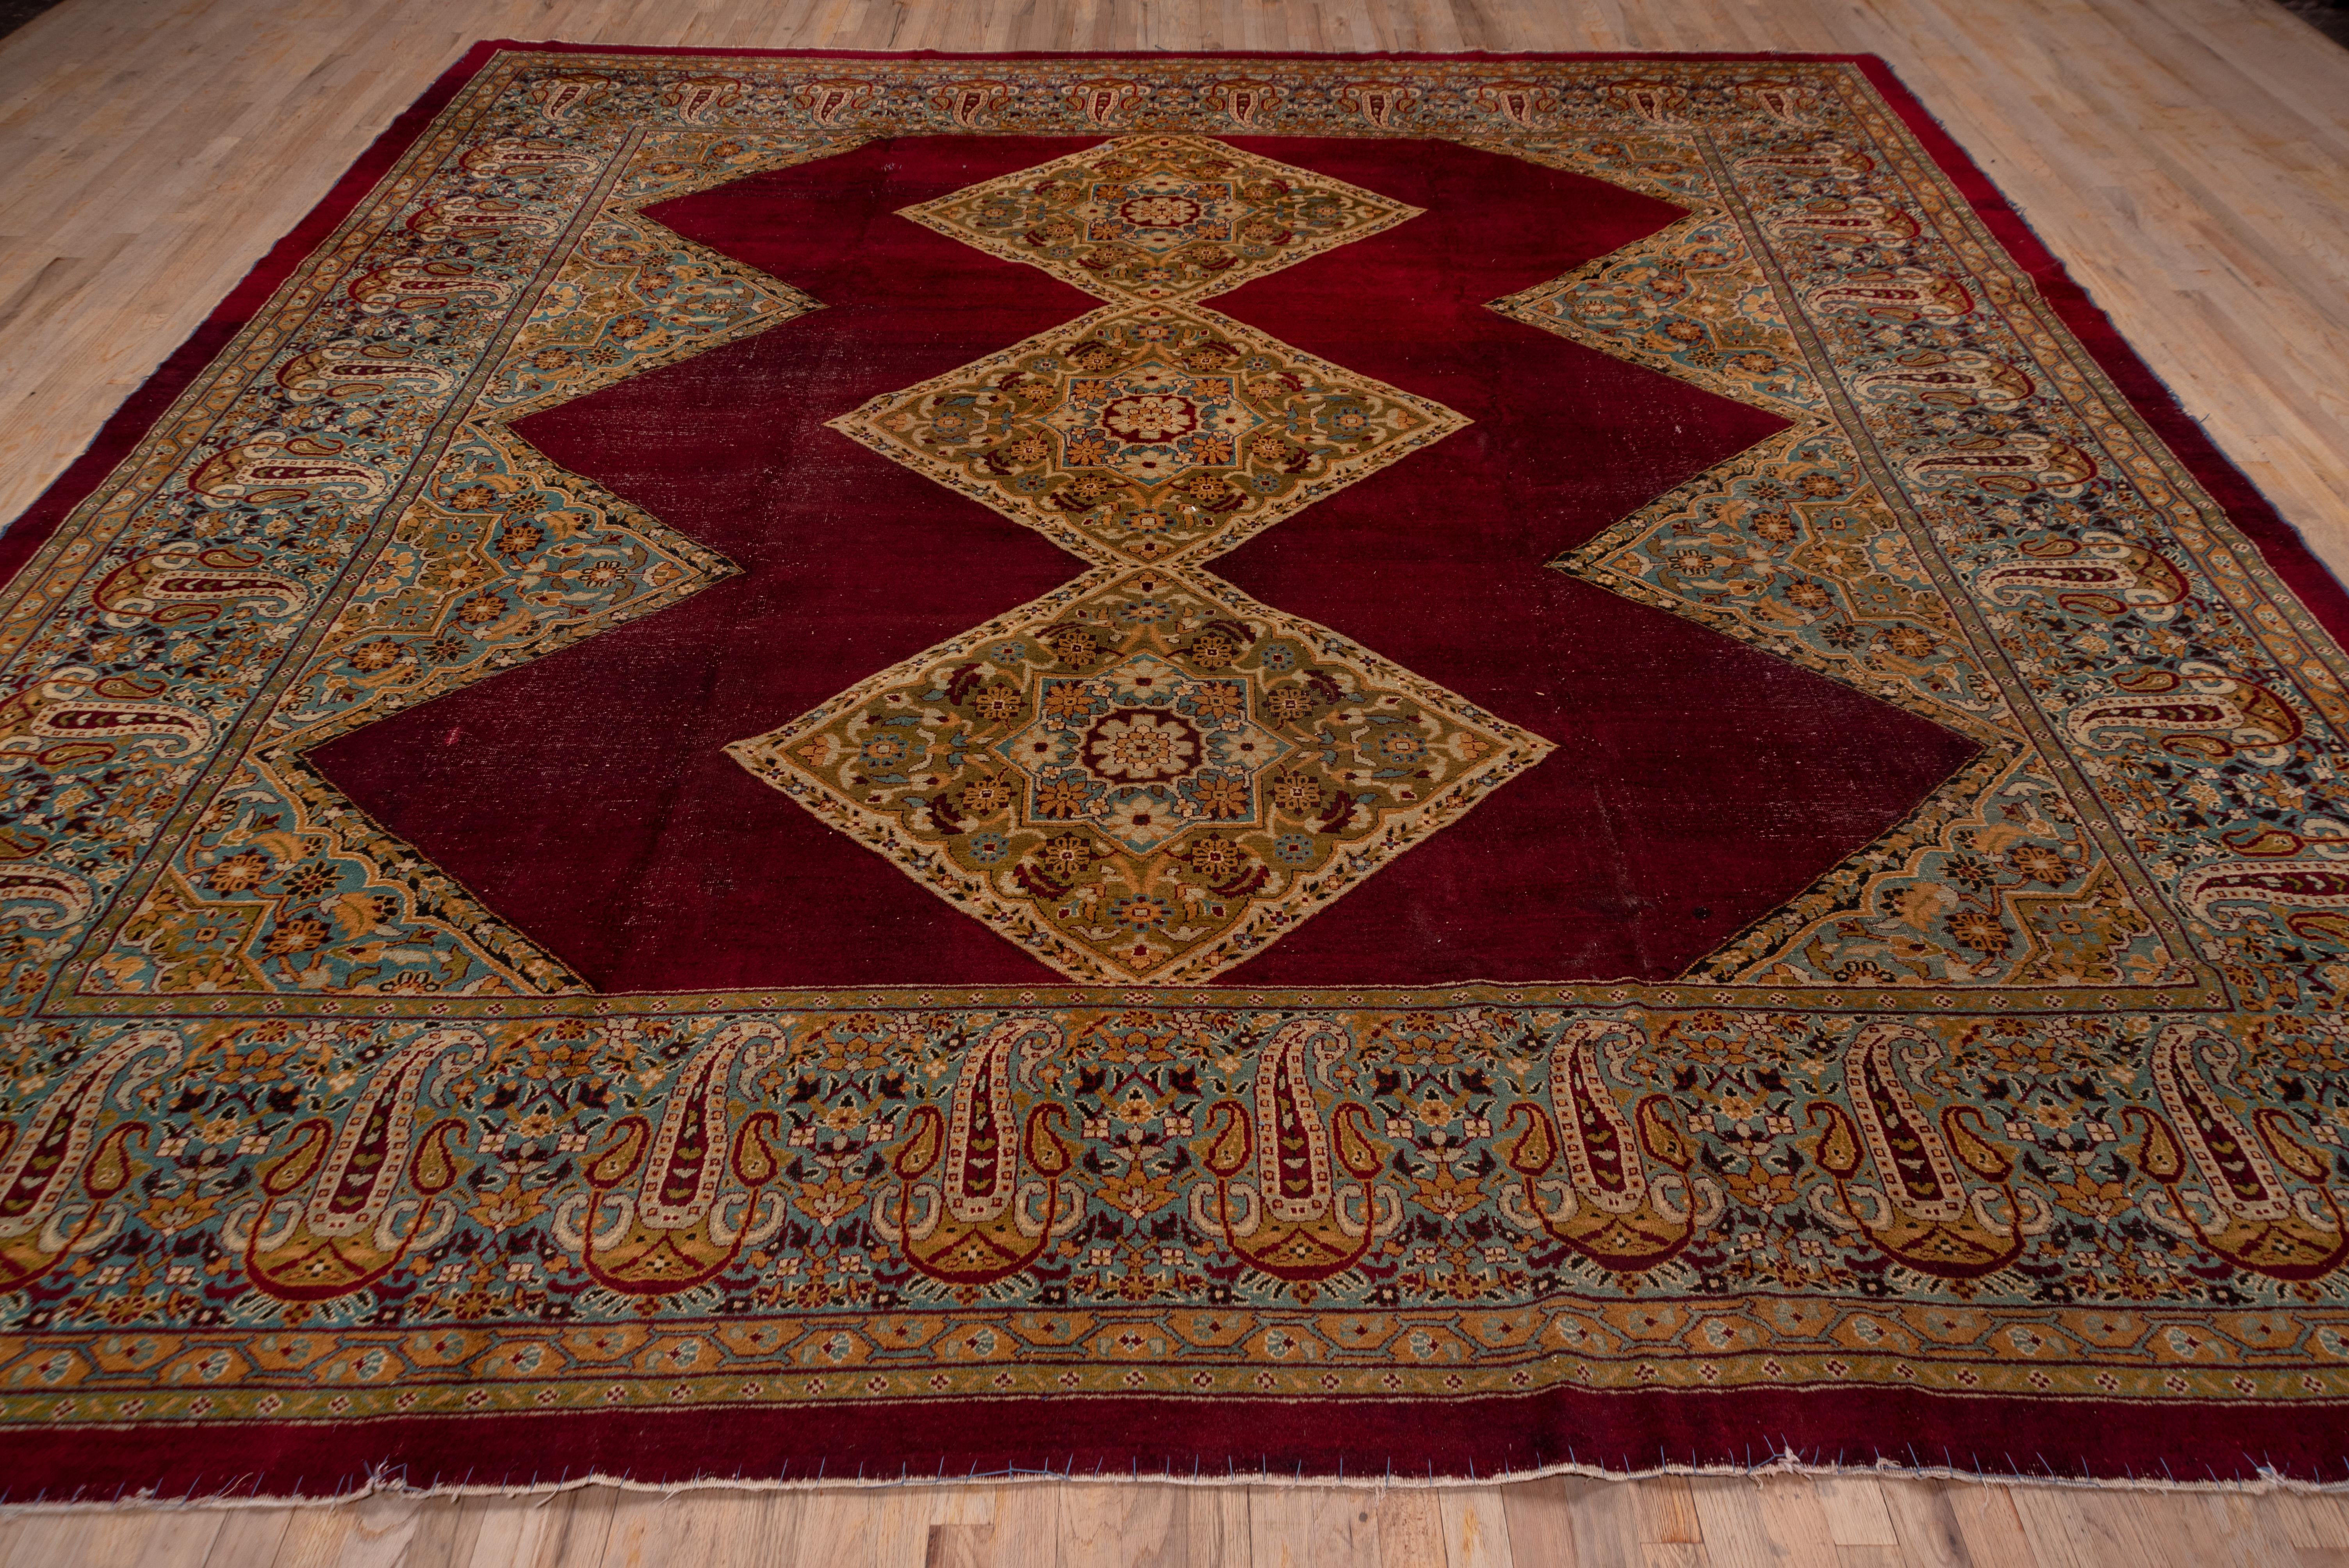 Hand-Knotted Antique Indian Amritzar Square Carpet, Burgundy Field, Multicolored Borders For Sale